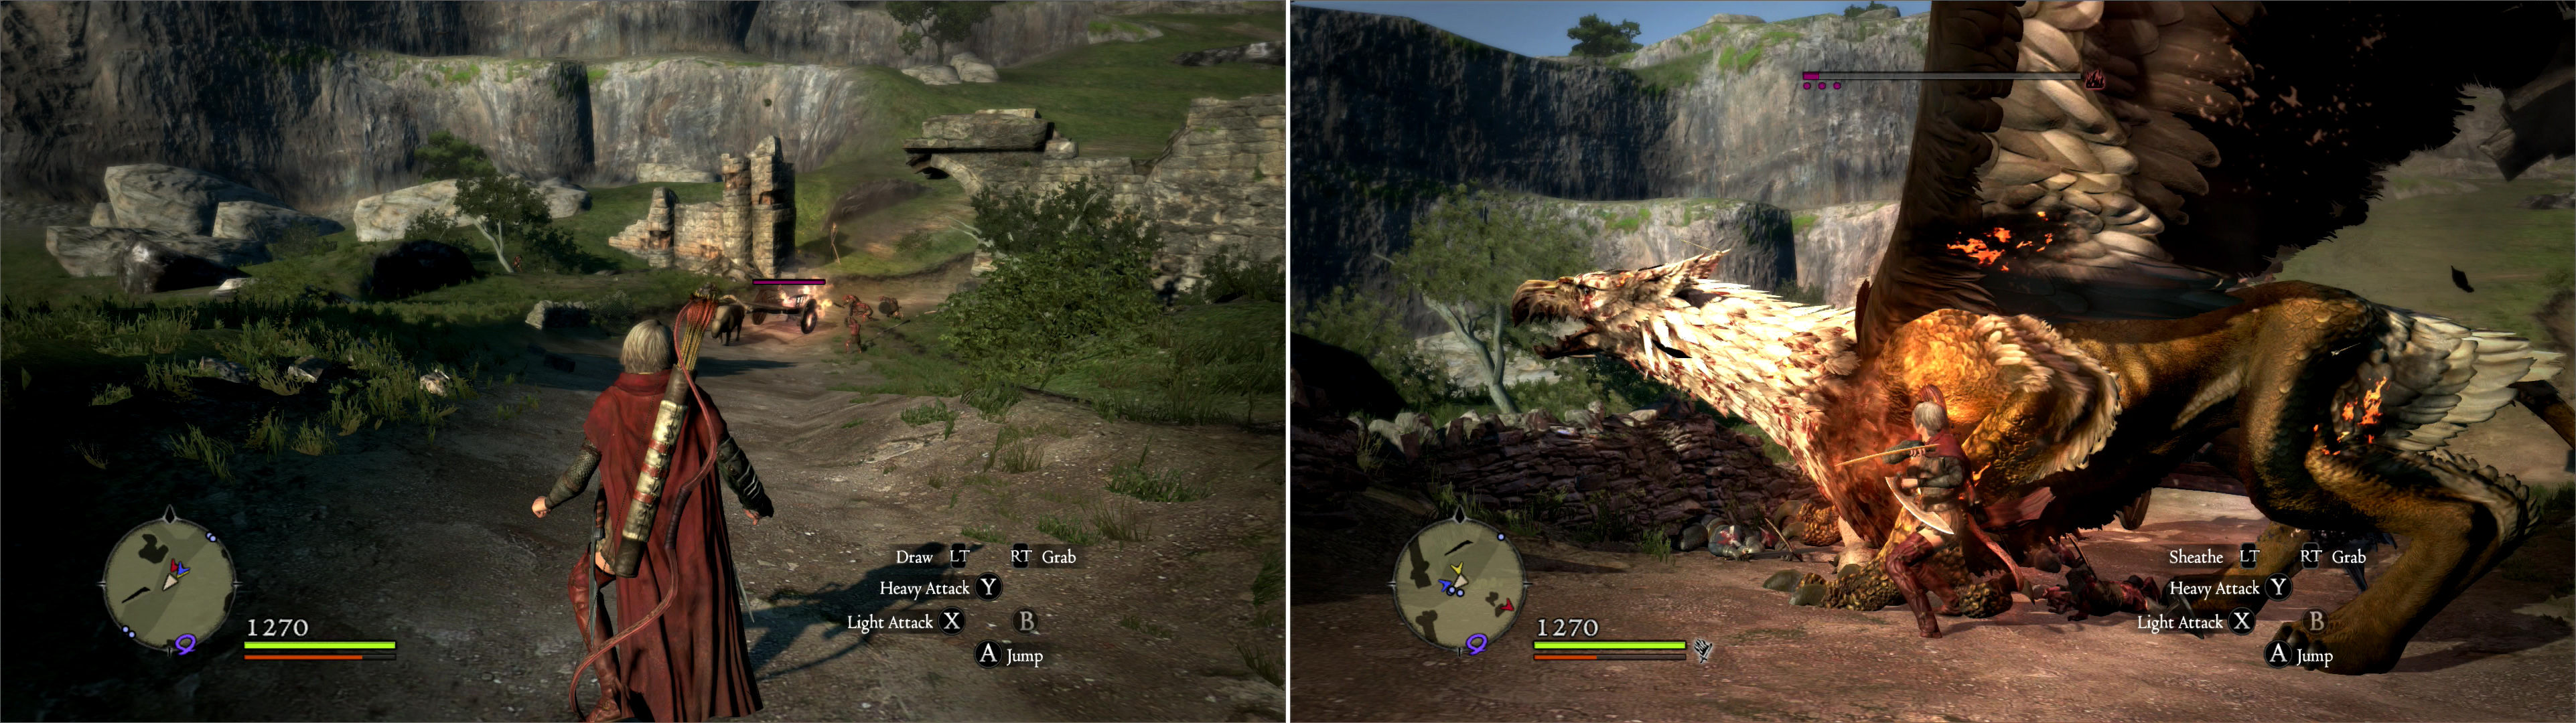 As you leave Gran Soren you’ll witness a wagon being attacked by some Goblins (left). Eventually a more dire threat - a Griffin - will show up and make off with the wagon’s Oxen (right).